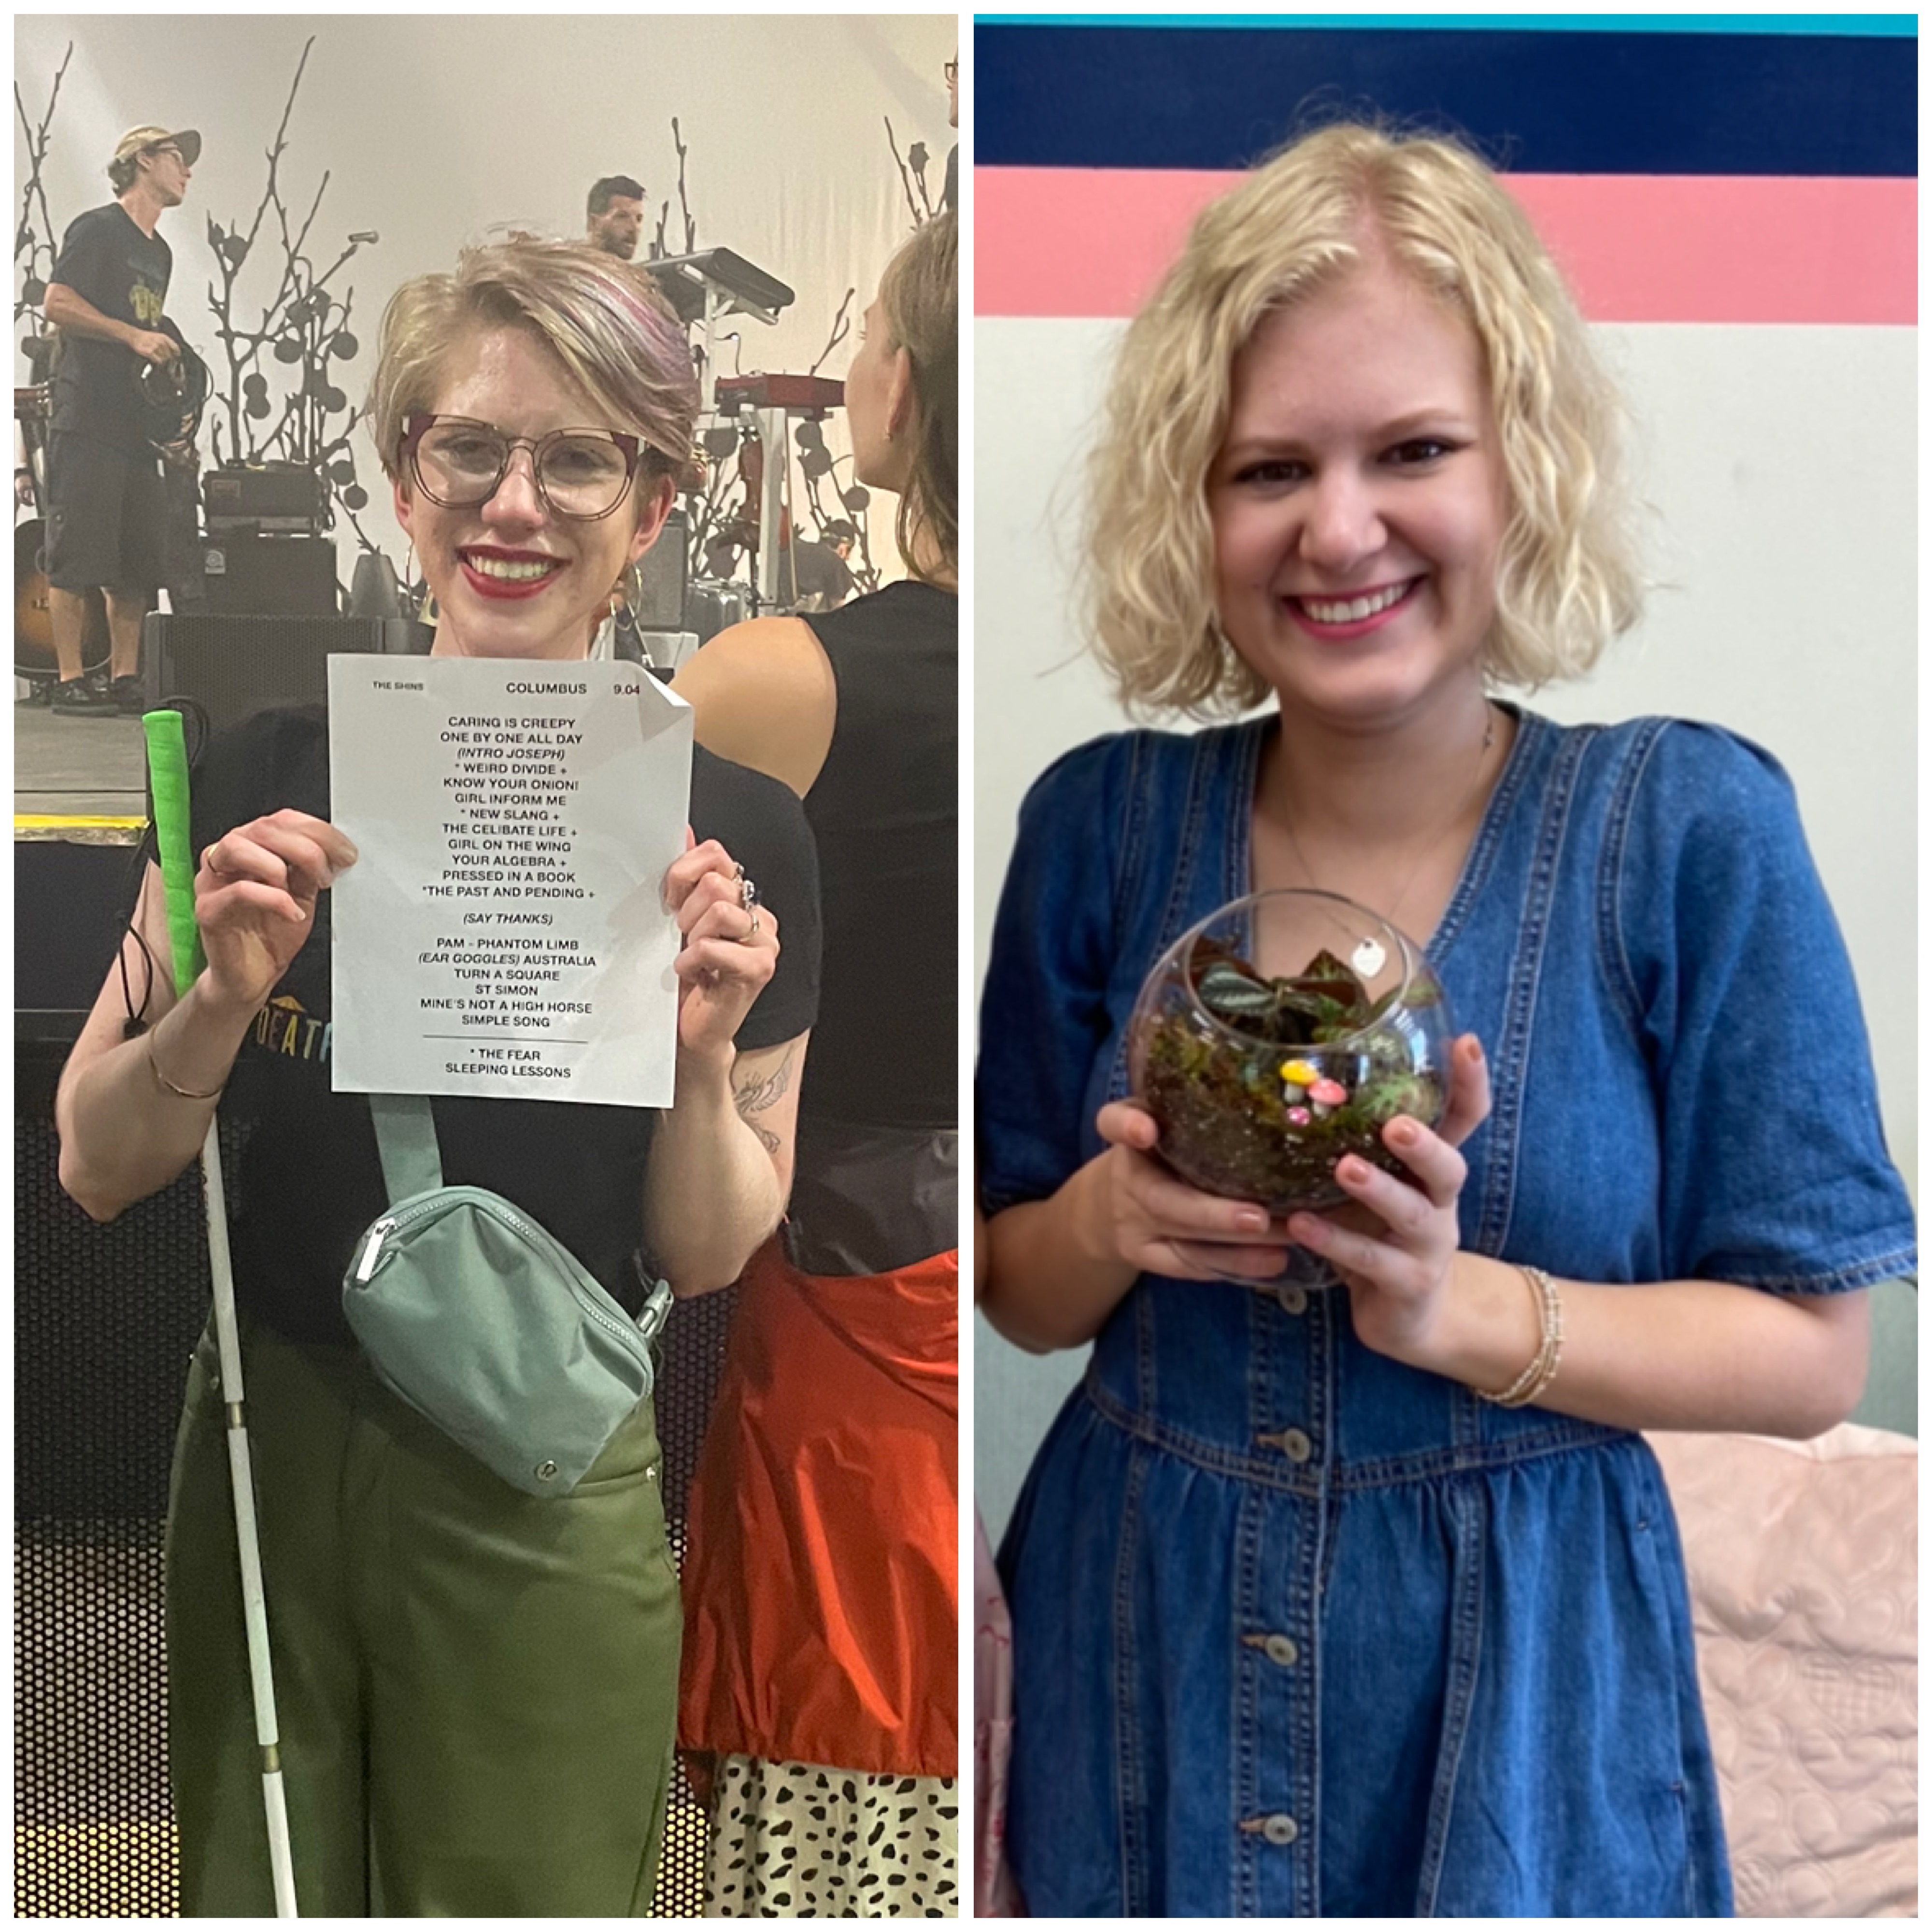 side by side collage of cassandra (left) and casey (right). cassandra smiles broadly and holds a piece of paper printed with track titles from the shins' concert in front of the stage at a venue. casey smiles and holds a glass terrarium filled with succulents. she smiles and wears a blue casual dress